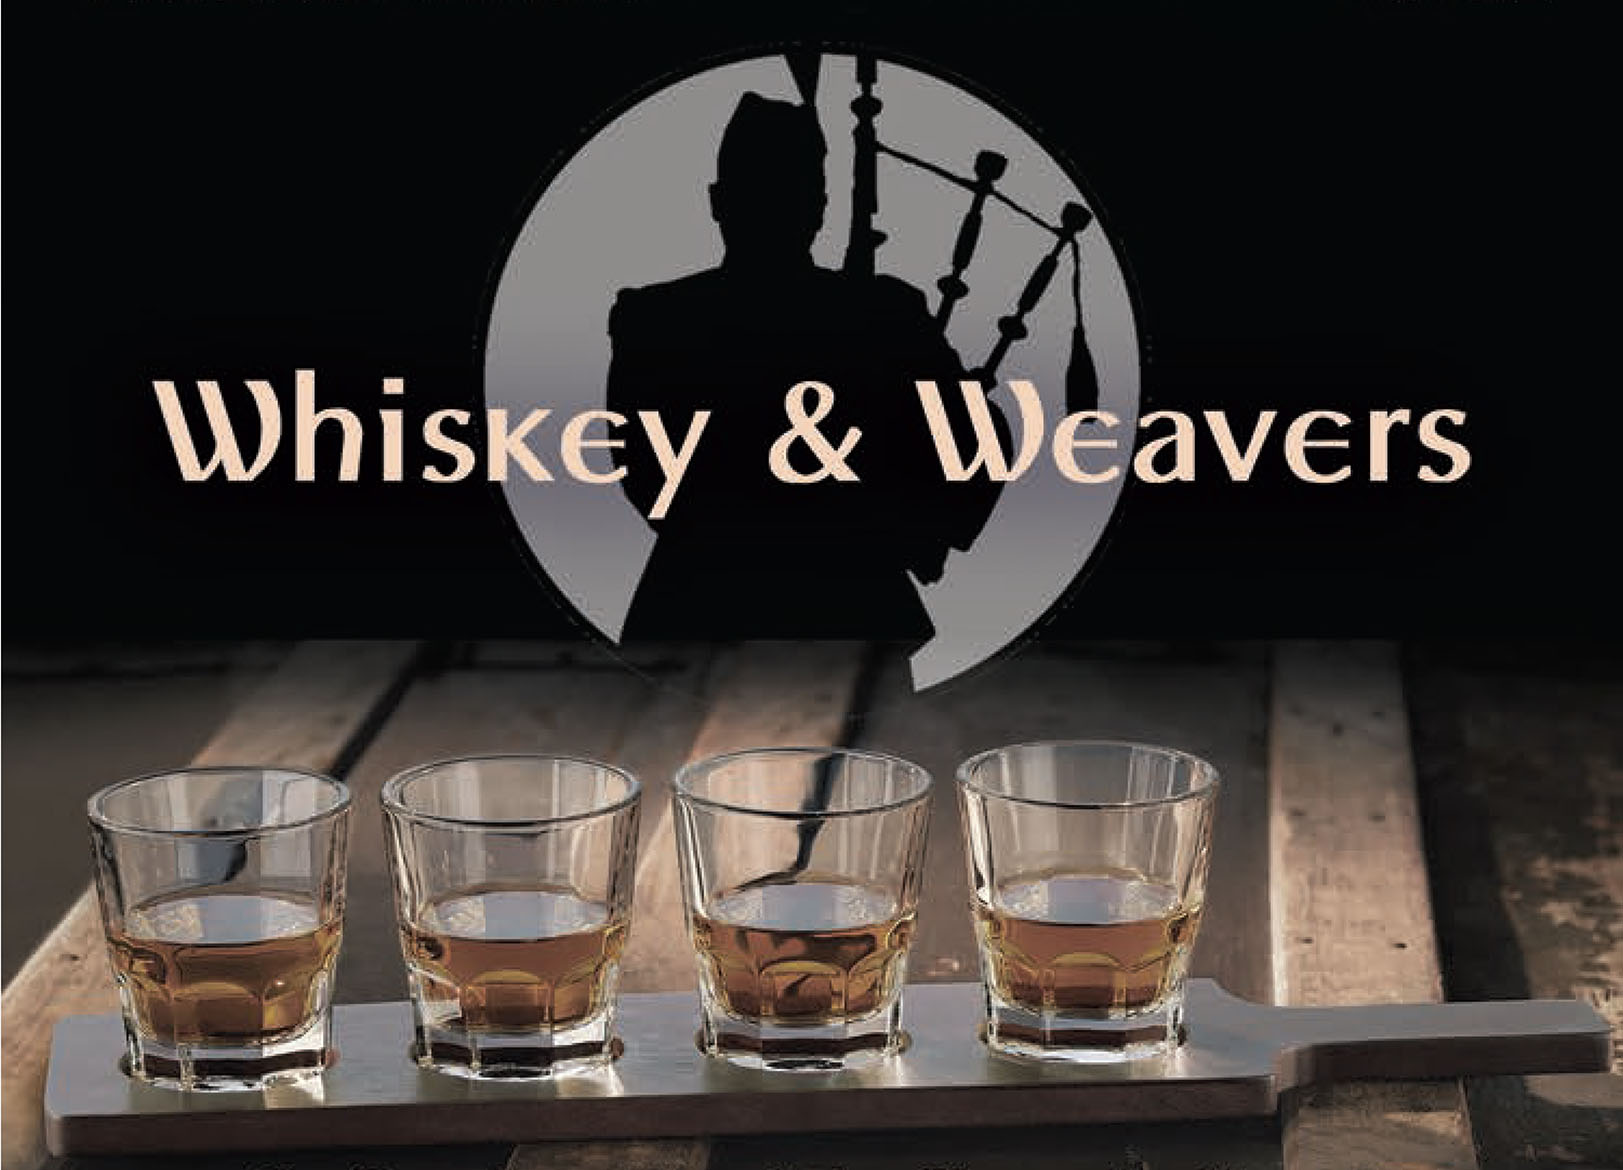 On Cinco de Mayo, Sunday, May 5, a whiskey tasting followed by a screening of the Tannahill Weavers in concert.